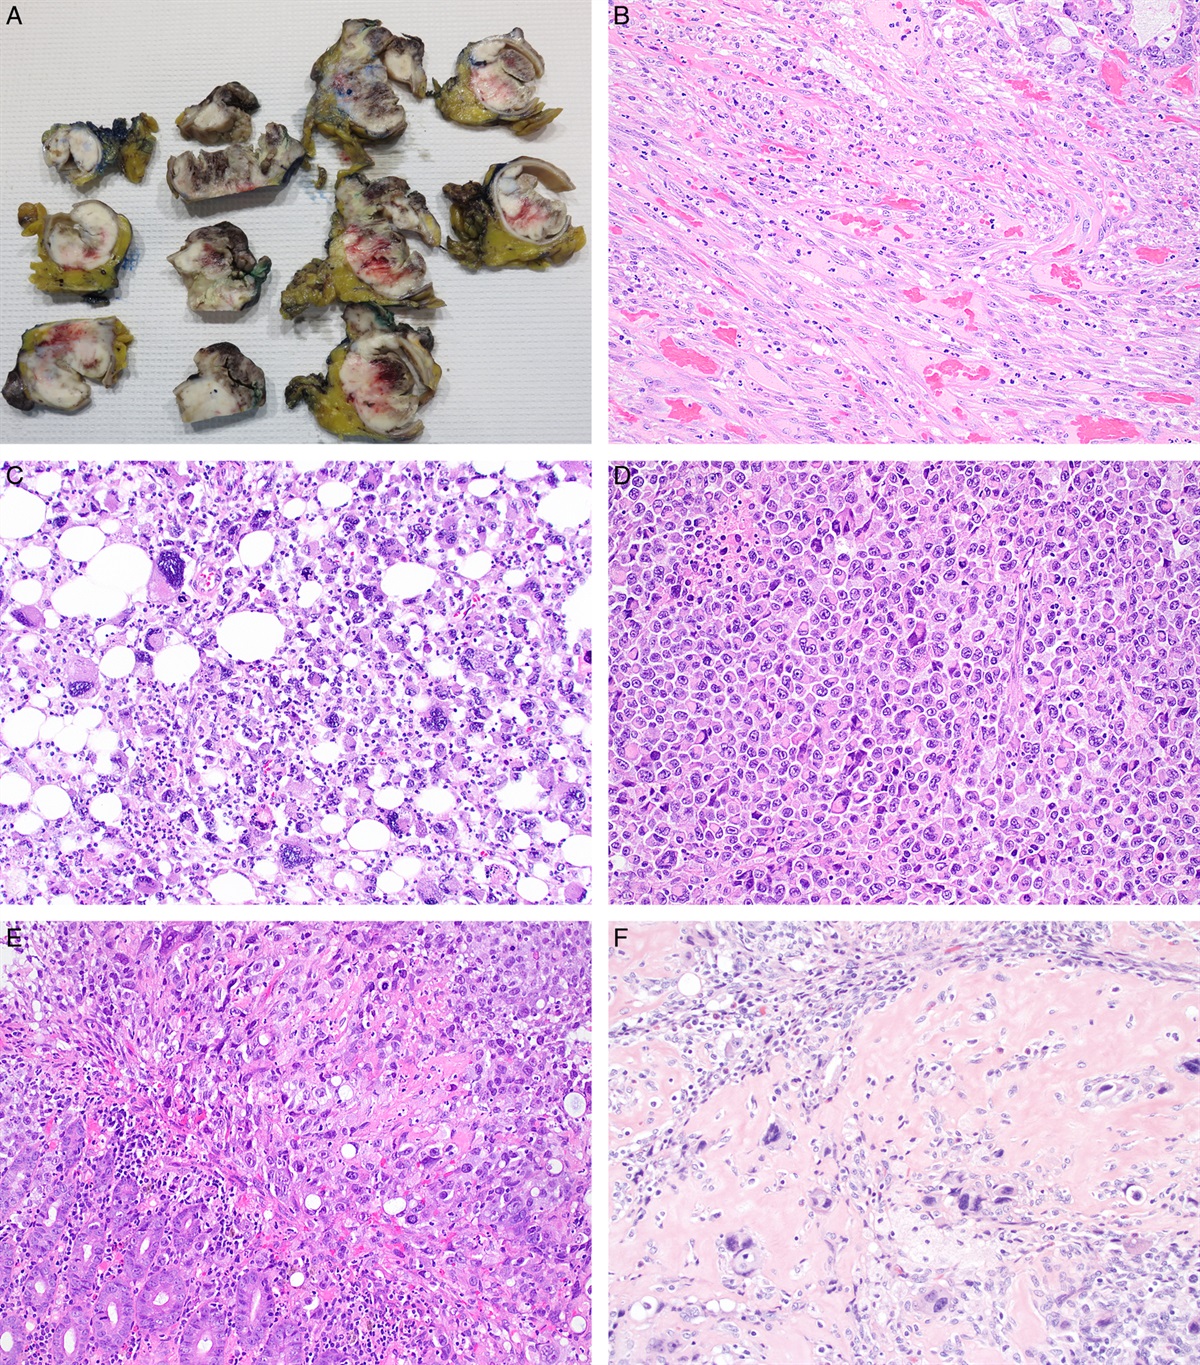 Colorectal Carcinoma With Sarcomatoid Components: Report of 15 Cases and Literature Review of an Exceedingly Rare Carcinoma Subtype